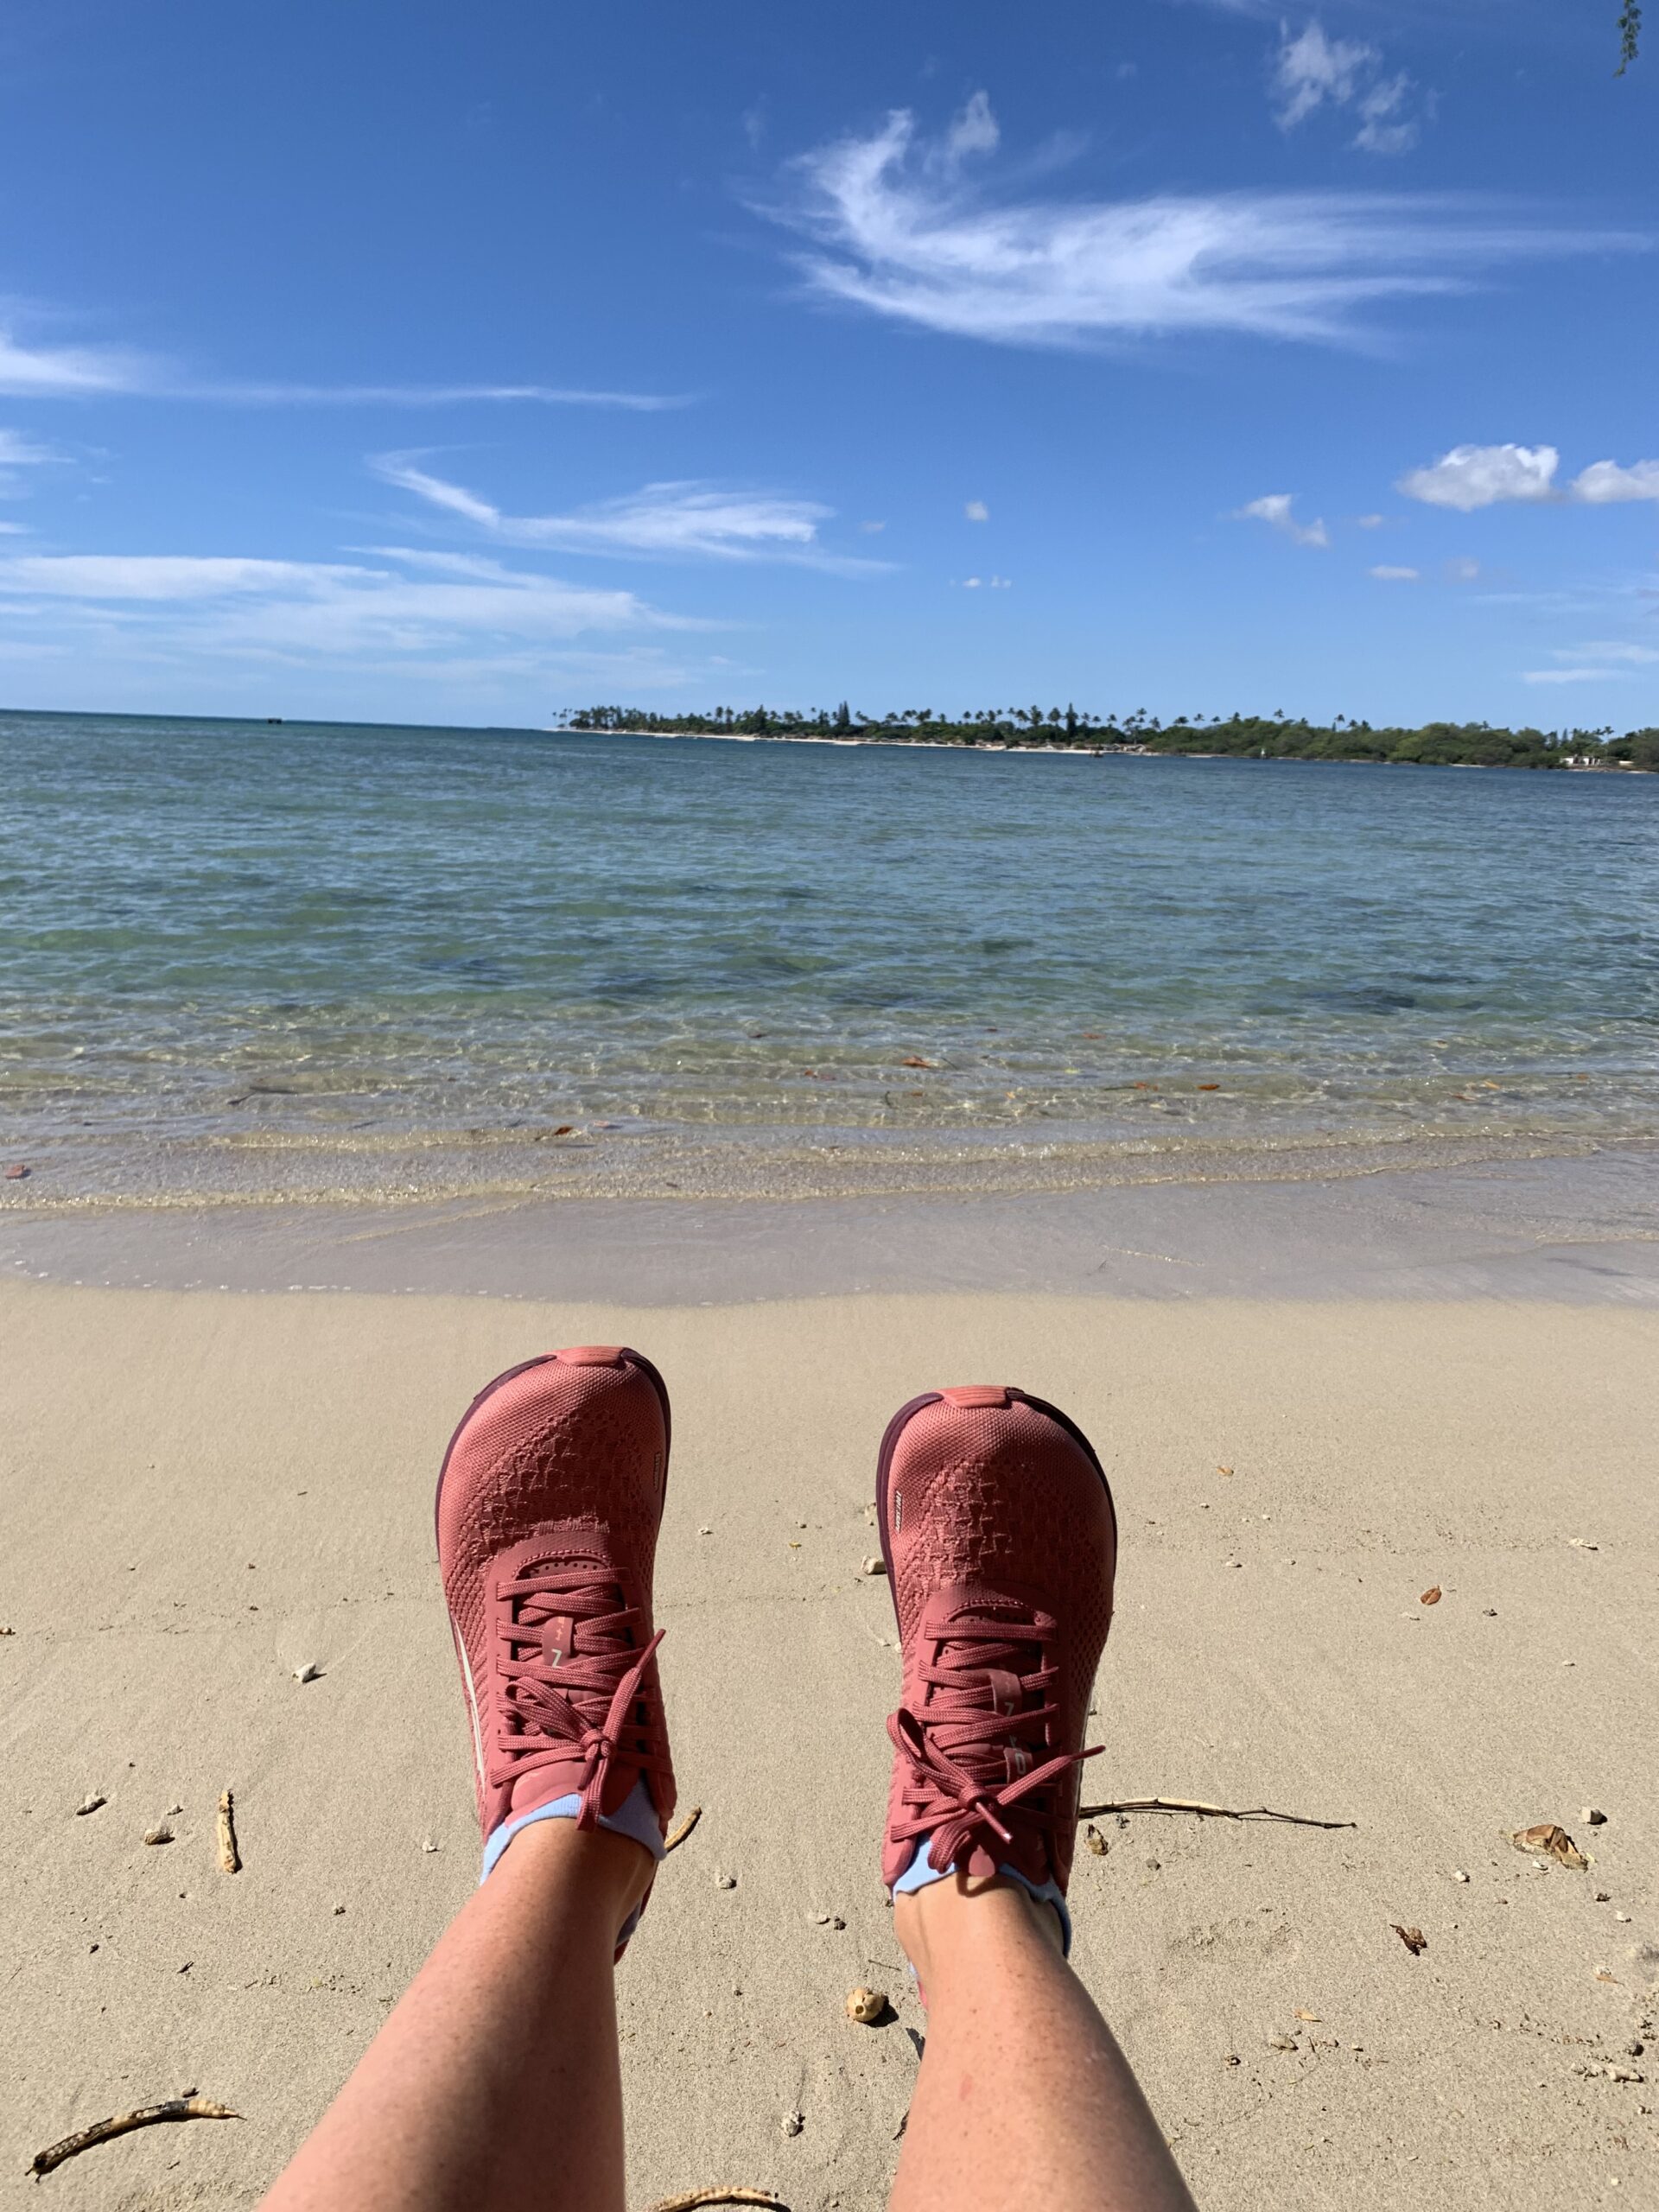 My Thoughts On Altra Running Shoes - Are you considering a pair of Altra running shoes? Here are my honest thoughts! | Altra Running Shoes Women - Altra running - Altra sneakers - Altra footwear - Zero drop sneakers